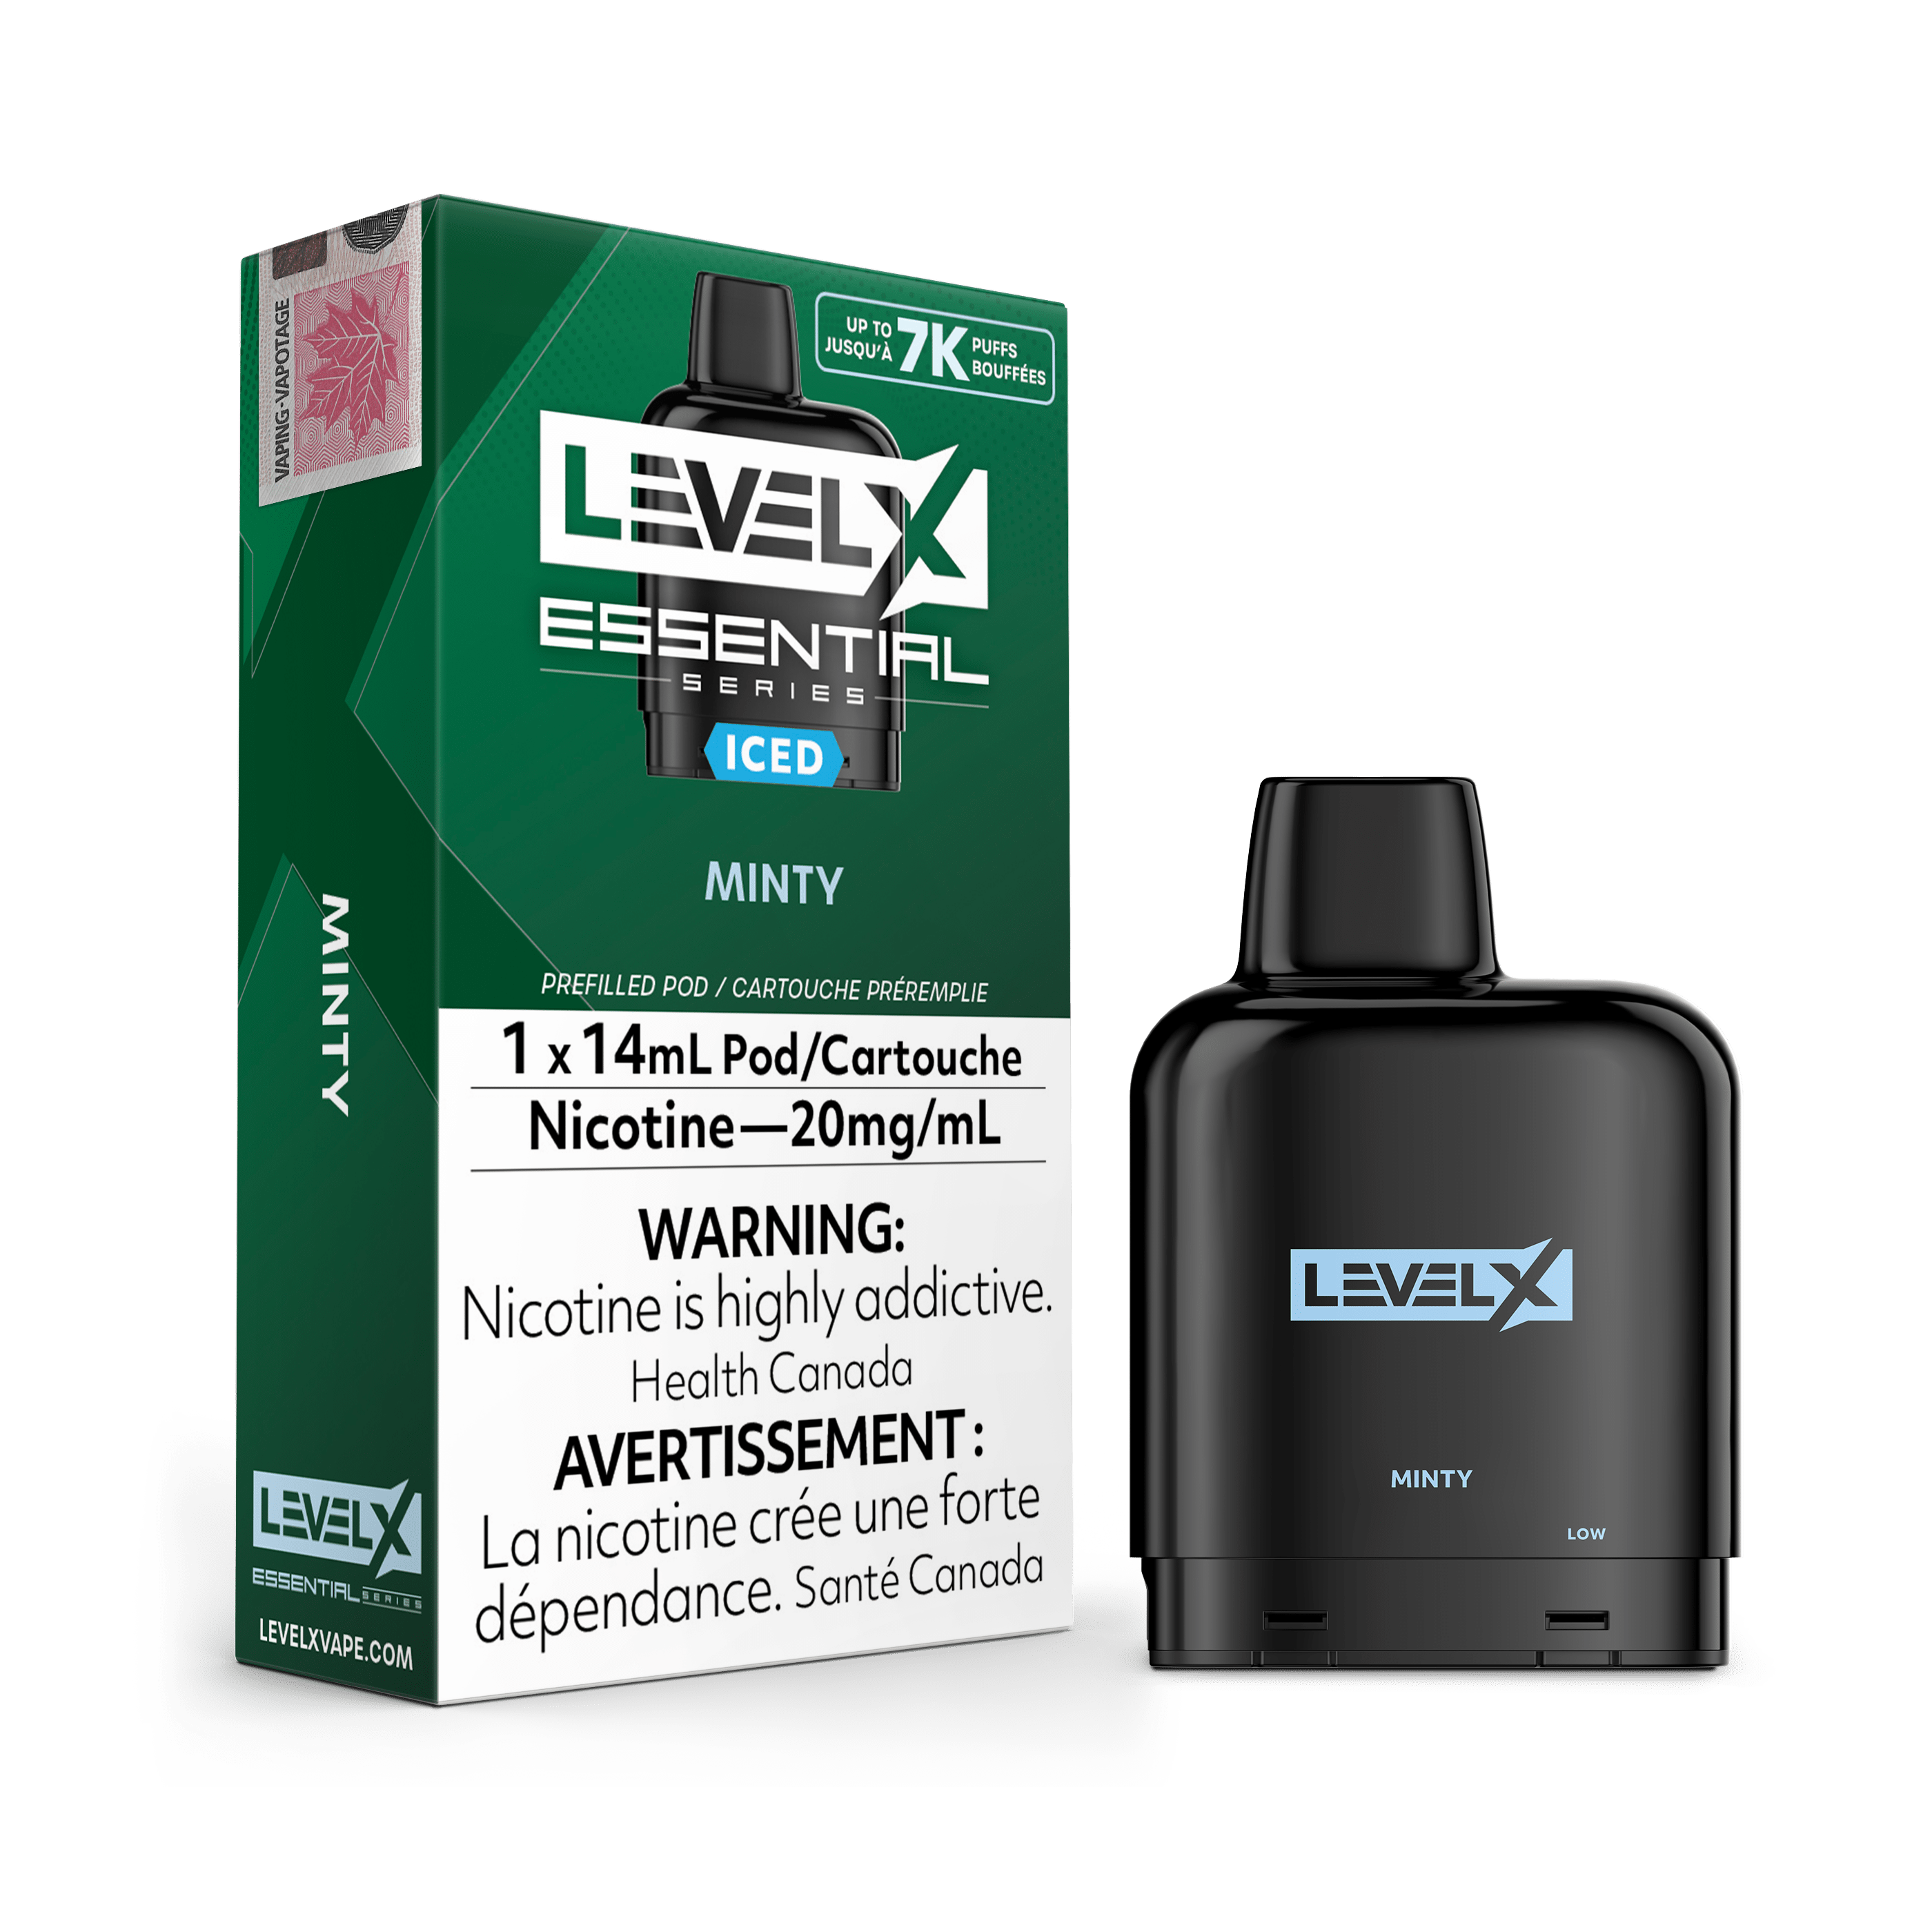 Level X Essential Series Pod - Minty Ice available on Canada online vape shop